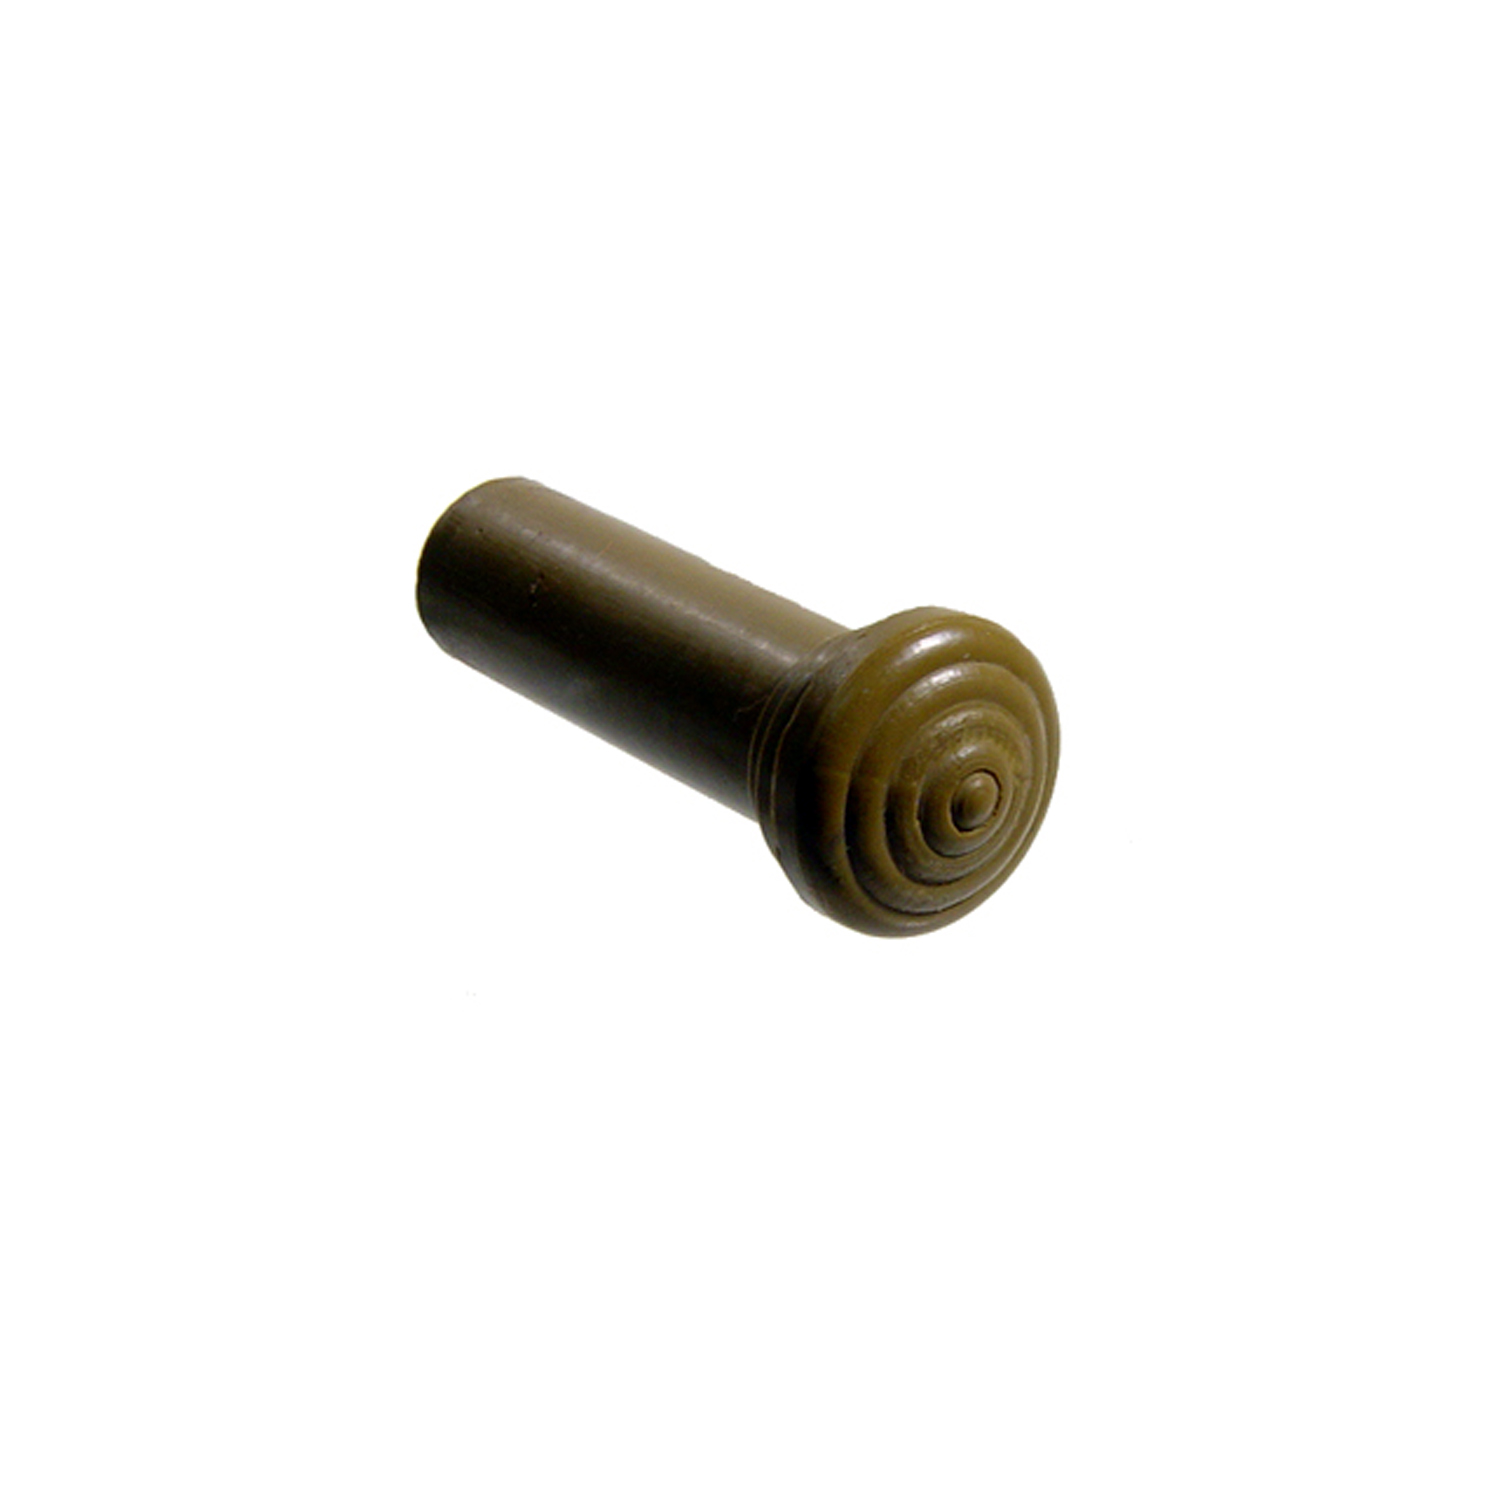 1955 Buick Roadmaster Door Lock Knob.  Made of Olive Green rubber, self-threading-RP 304-G